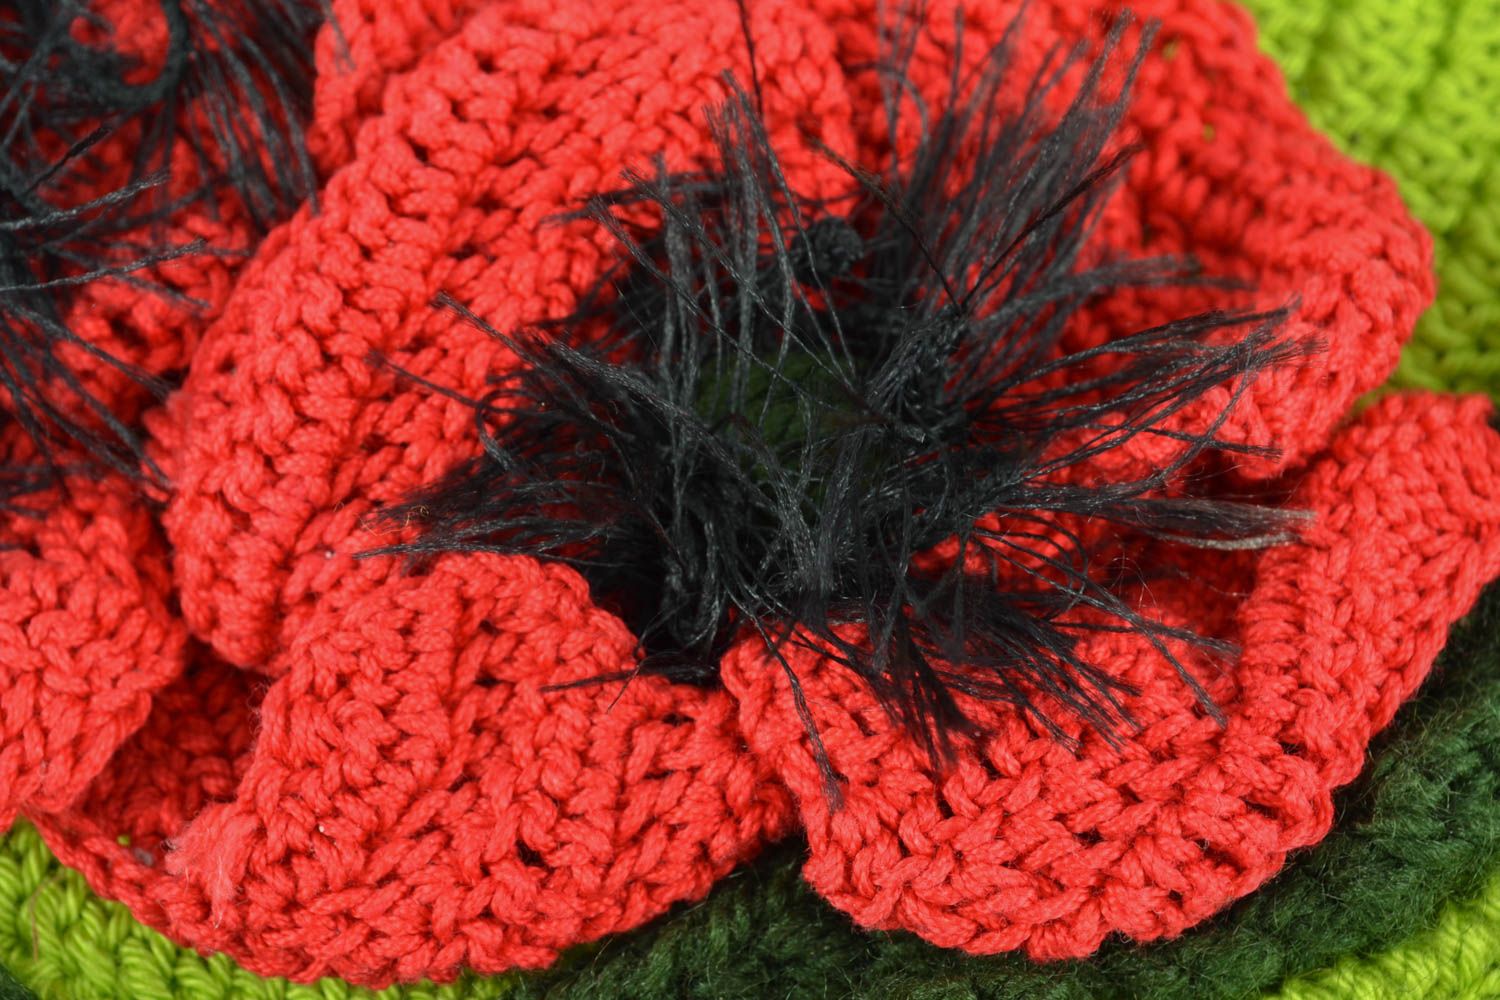 Crochet bag with flowers photo 2